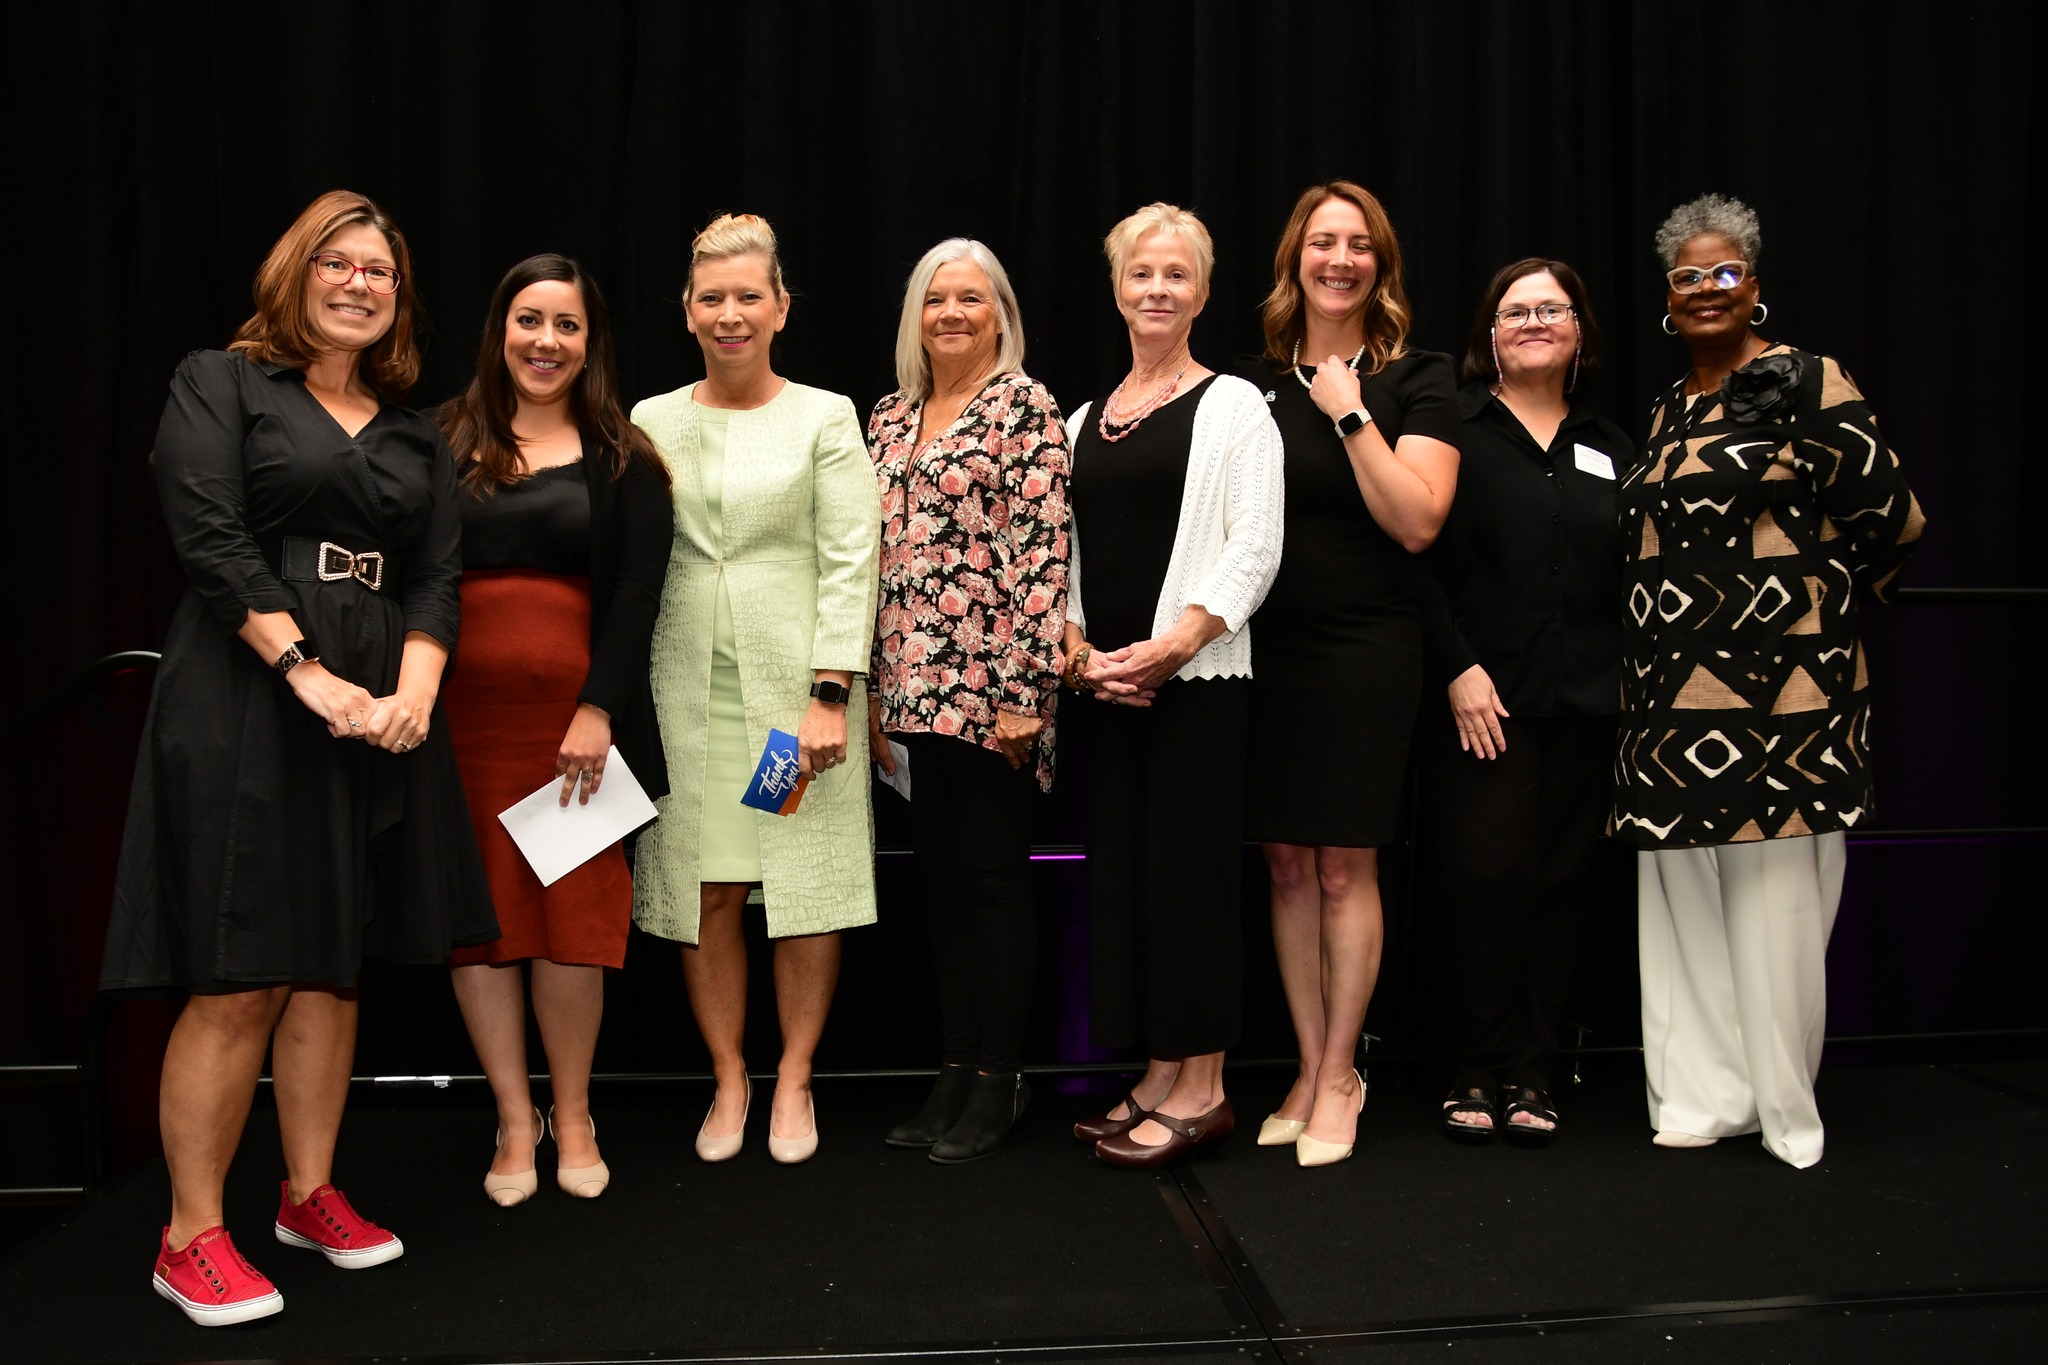 Representatives of each organization that was awarded the Iowa Women's Foundation's Core Grant